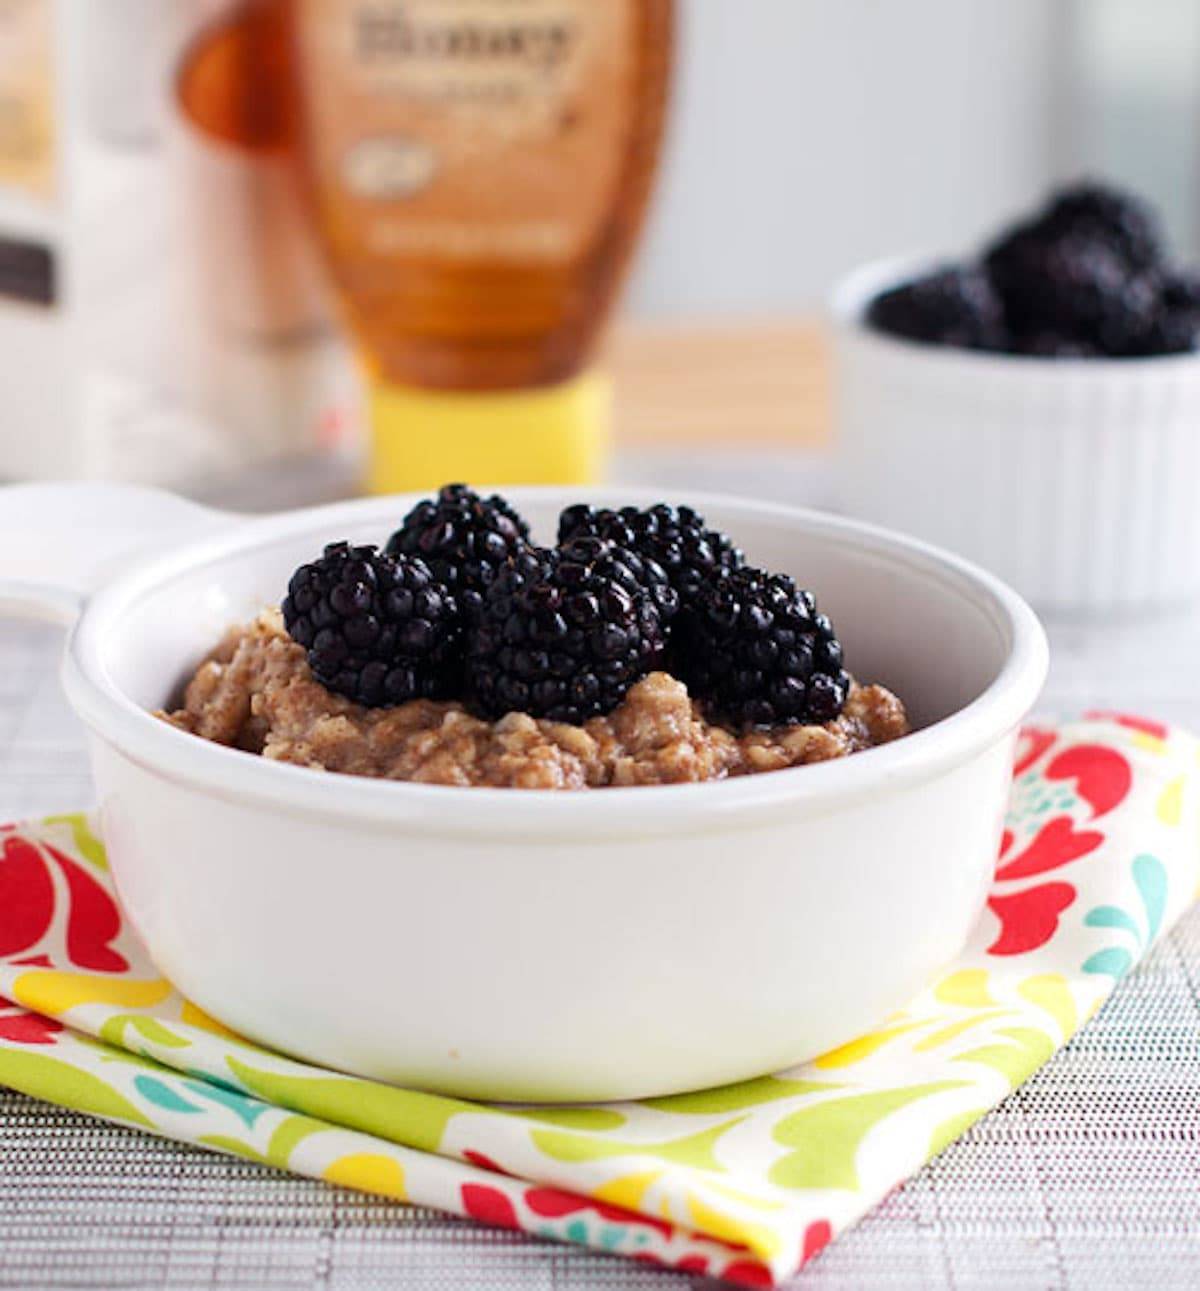 Blackberries and cream oats in a white dish on a colorful napkin.